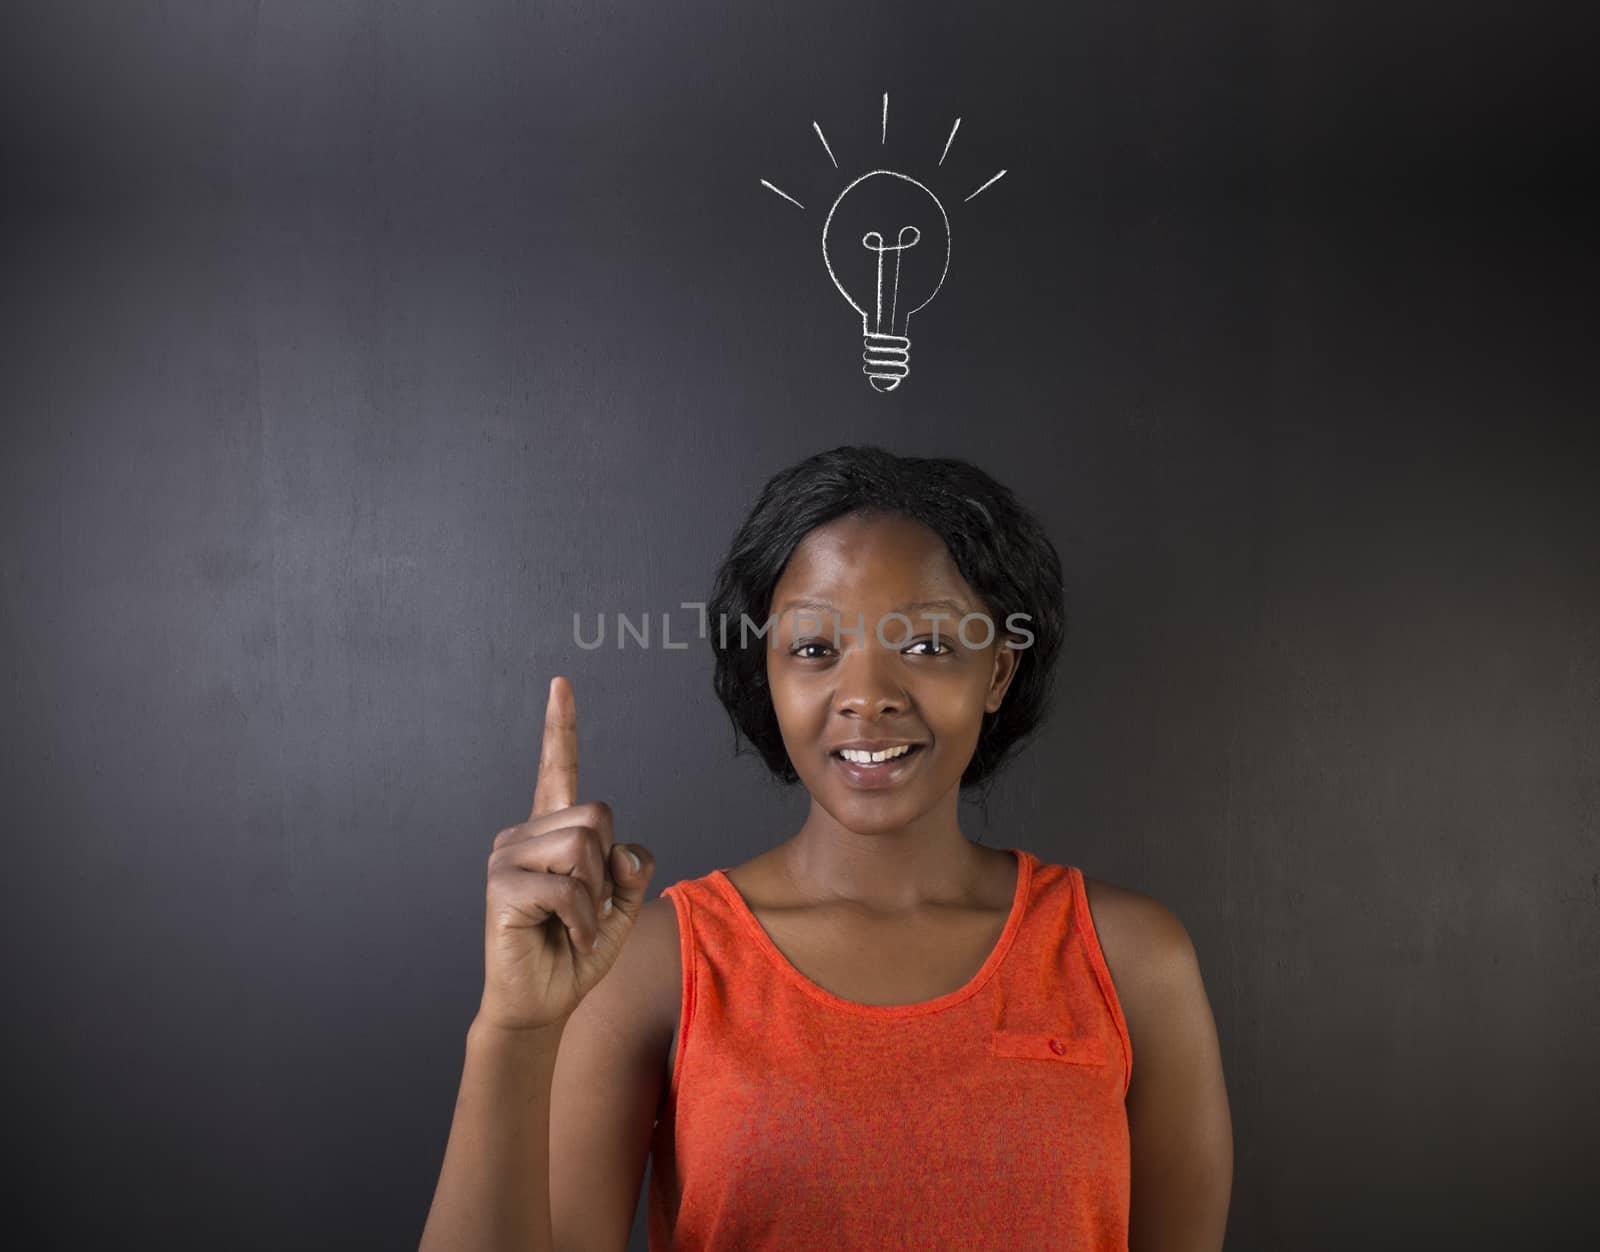 Bright idea lightbulb thinking South African or African American woman teacher or student by alistaircotton